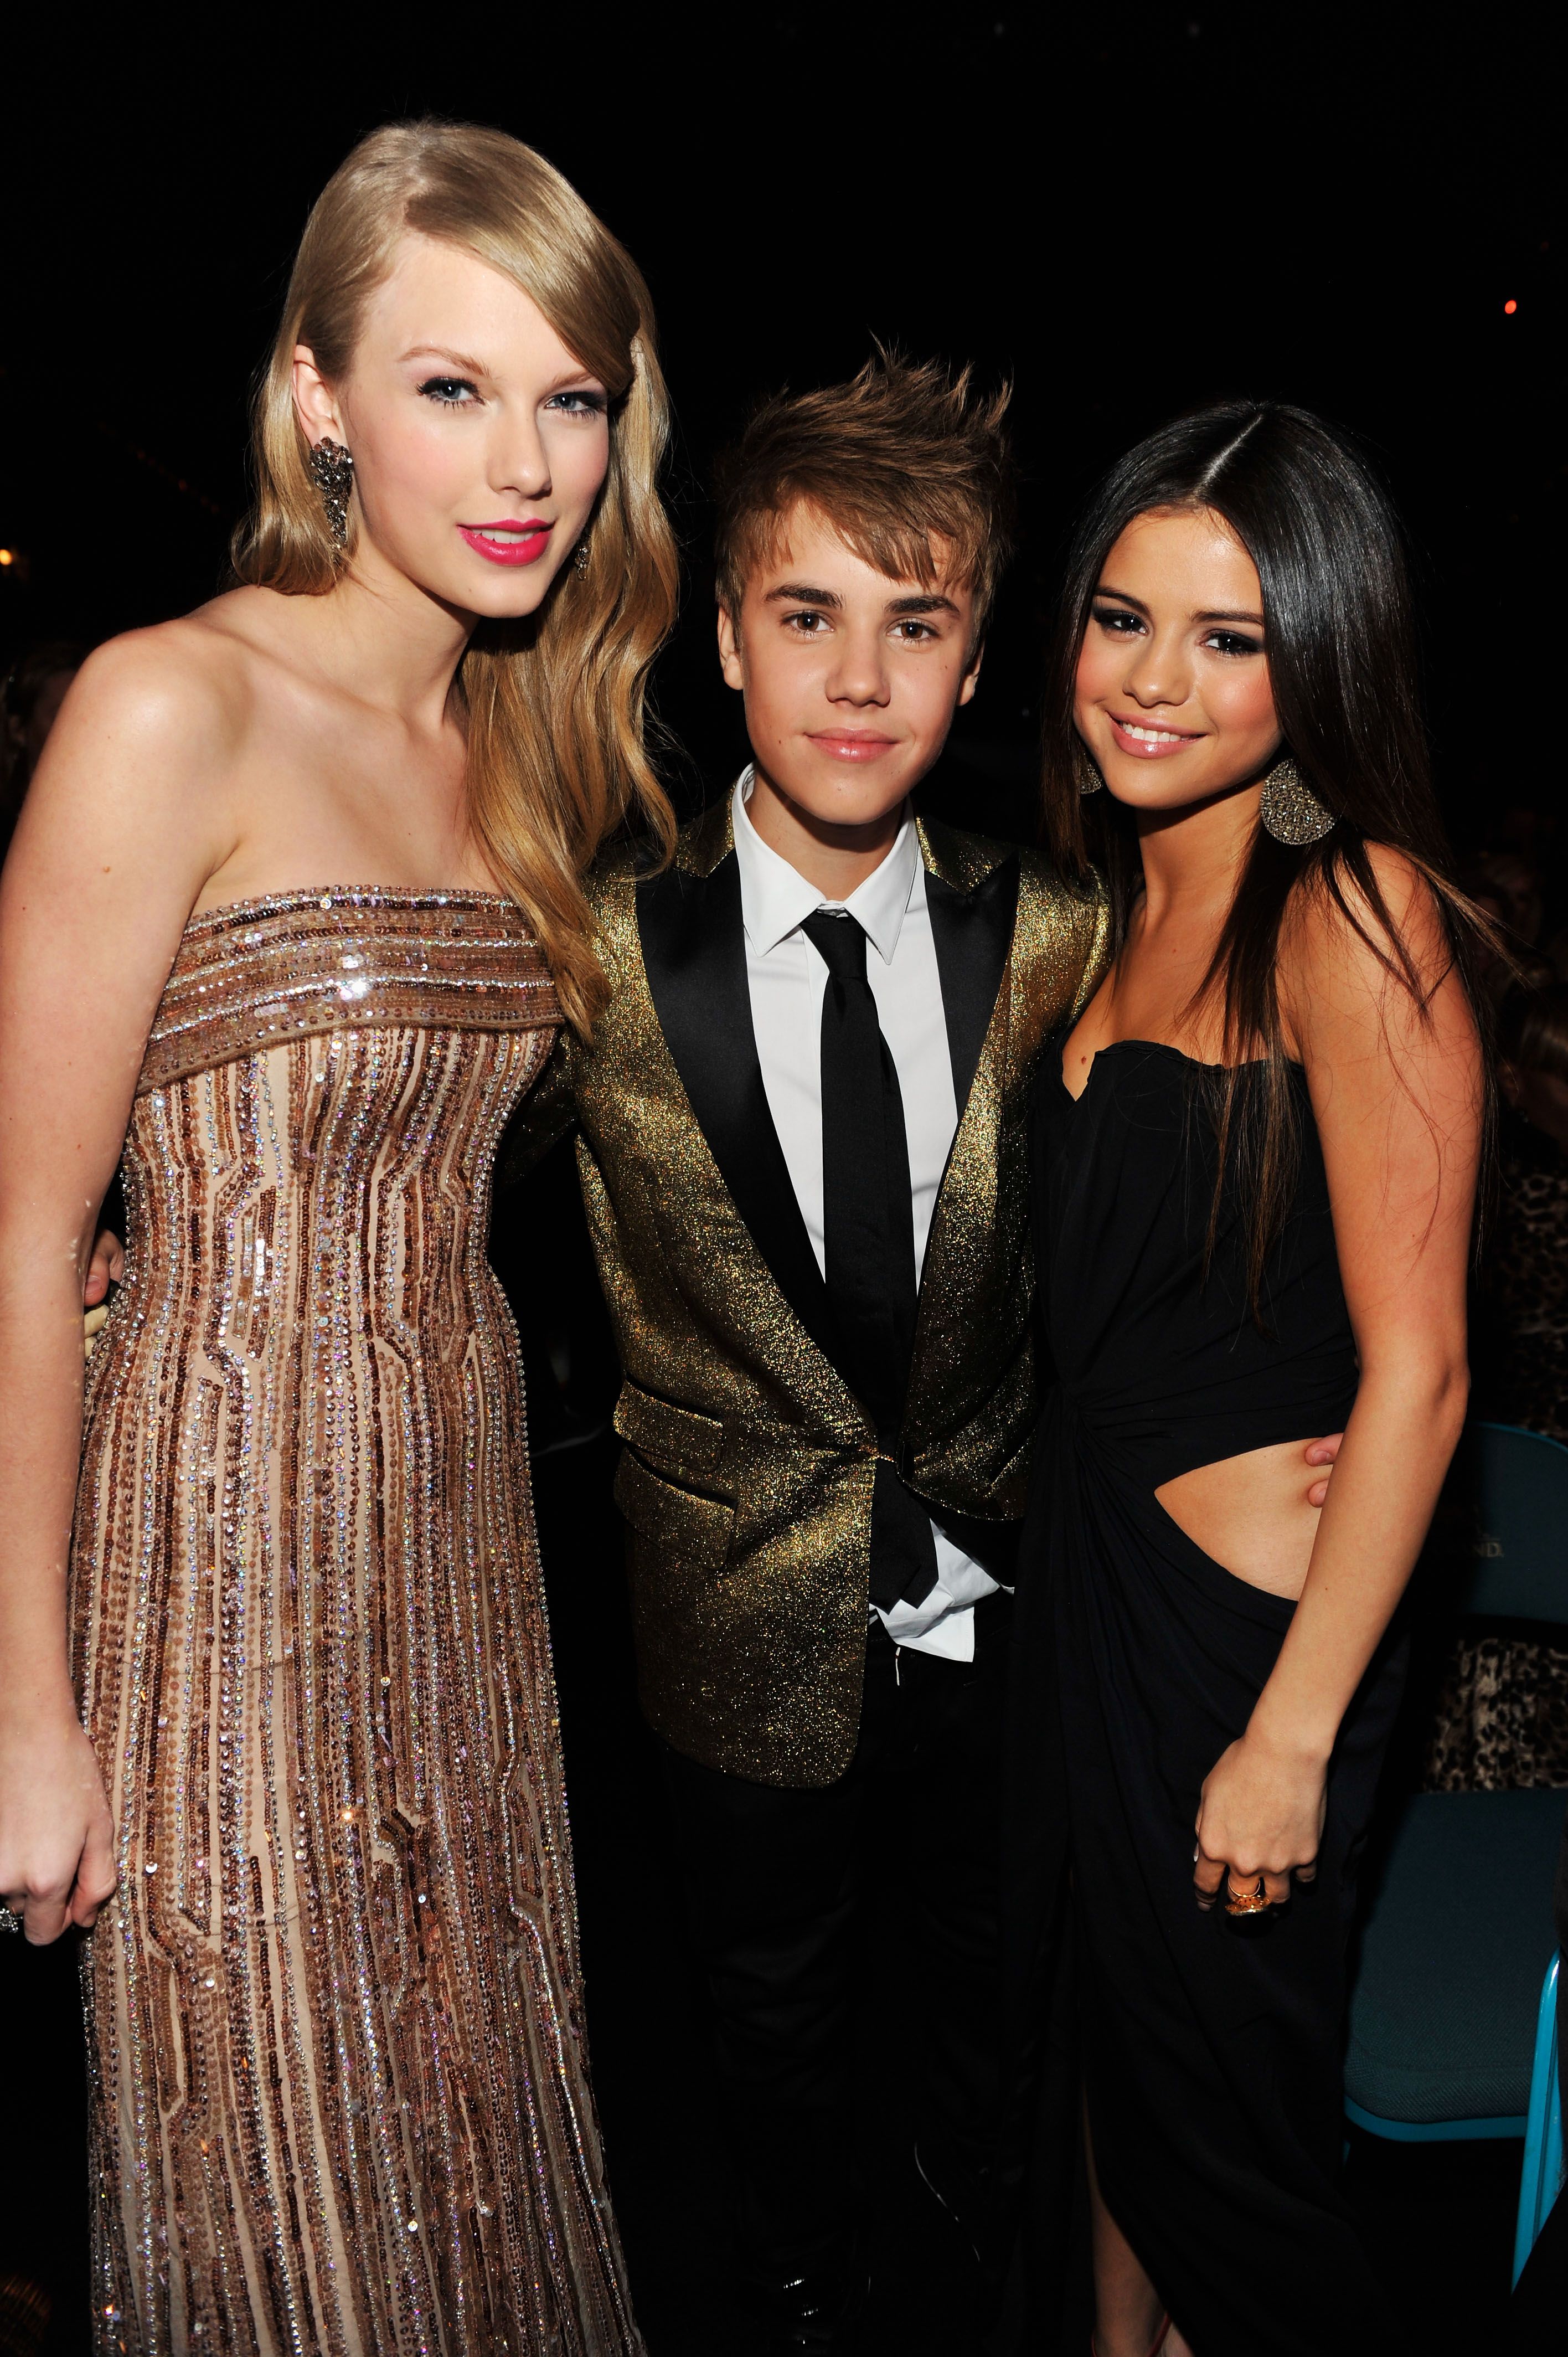 Taylor Swift Confirms Justin Bieber Cheated On Selena Gomez pic pic